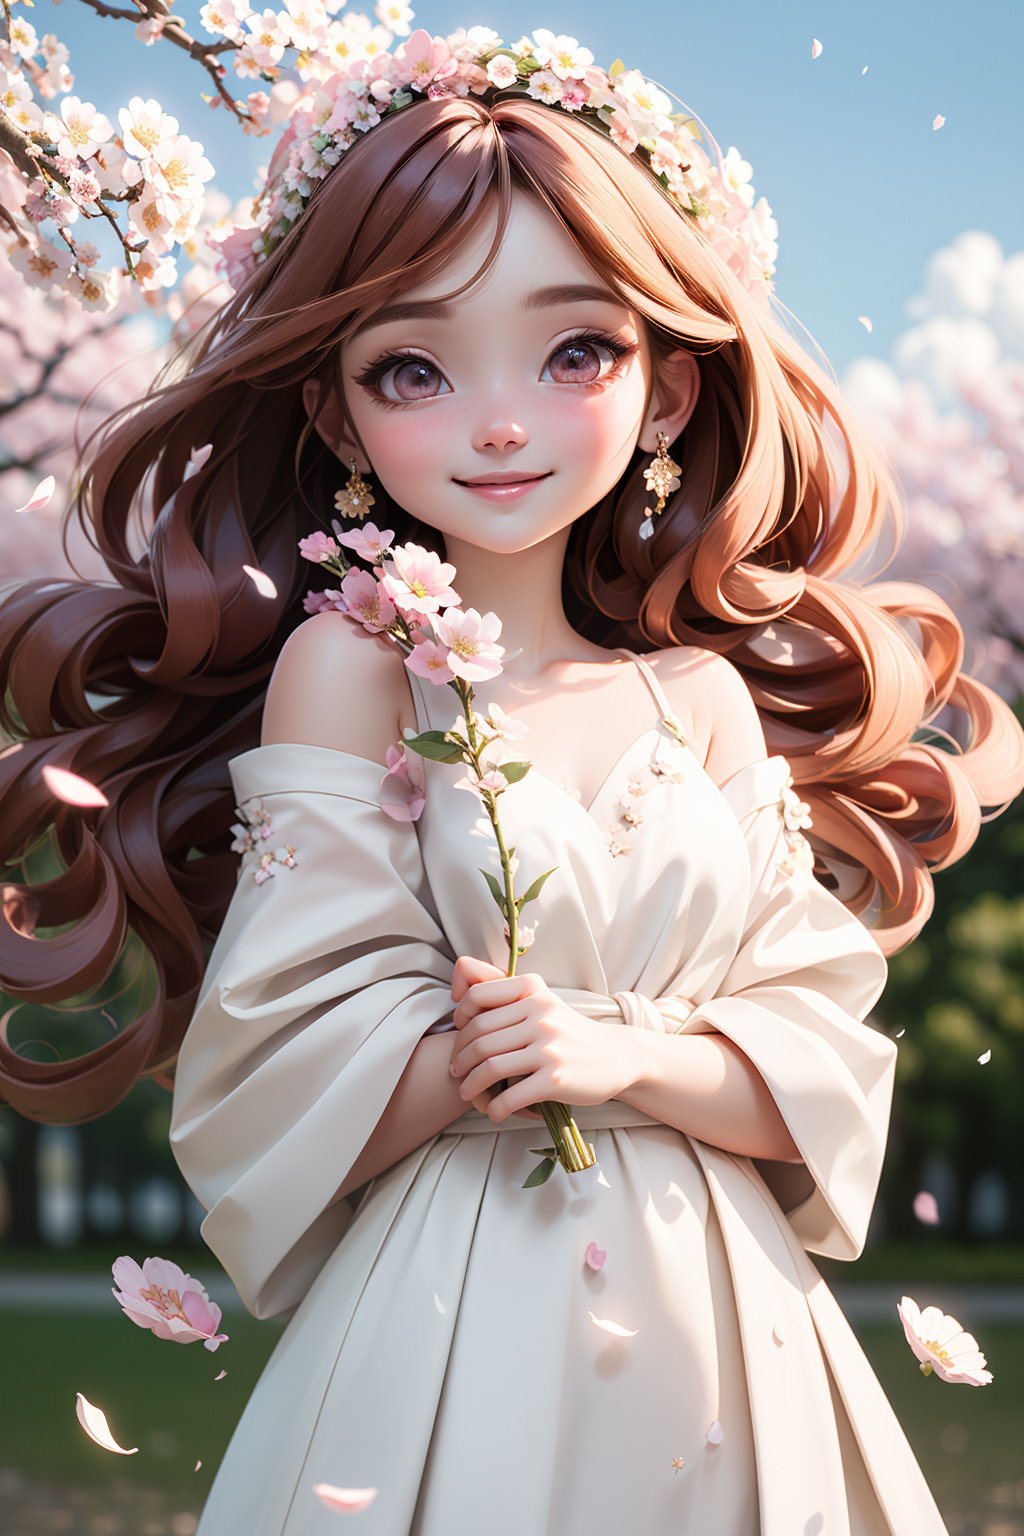 masterpiece, best quality, 8k, official art, cinematic light, ultra high res, 1girl, cherry_blossoms, falling_petals, petals, branch, pink_flower, 1girl, 20-year-old, blue_sky, spring_\, (season\), petals_on_liquid, flower, hanami, dress, (golden long curly hair: 1.5), wearing flower wreath, sky, outdoor, Clouds, bangs, smile, pink eyes, white dress with cherry blossoms, bare shoulders, earrings, best quality. Picture perfect. holding_flower, wind, tree, looking_at_viewer, cowboy shot, detail enhancement